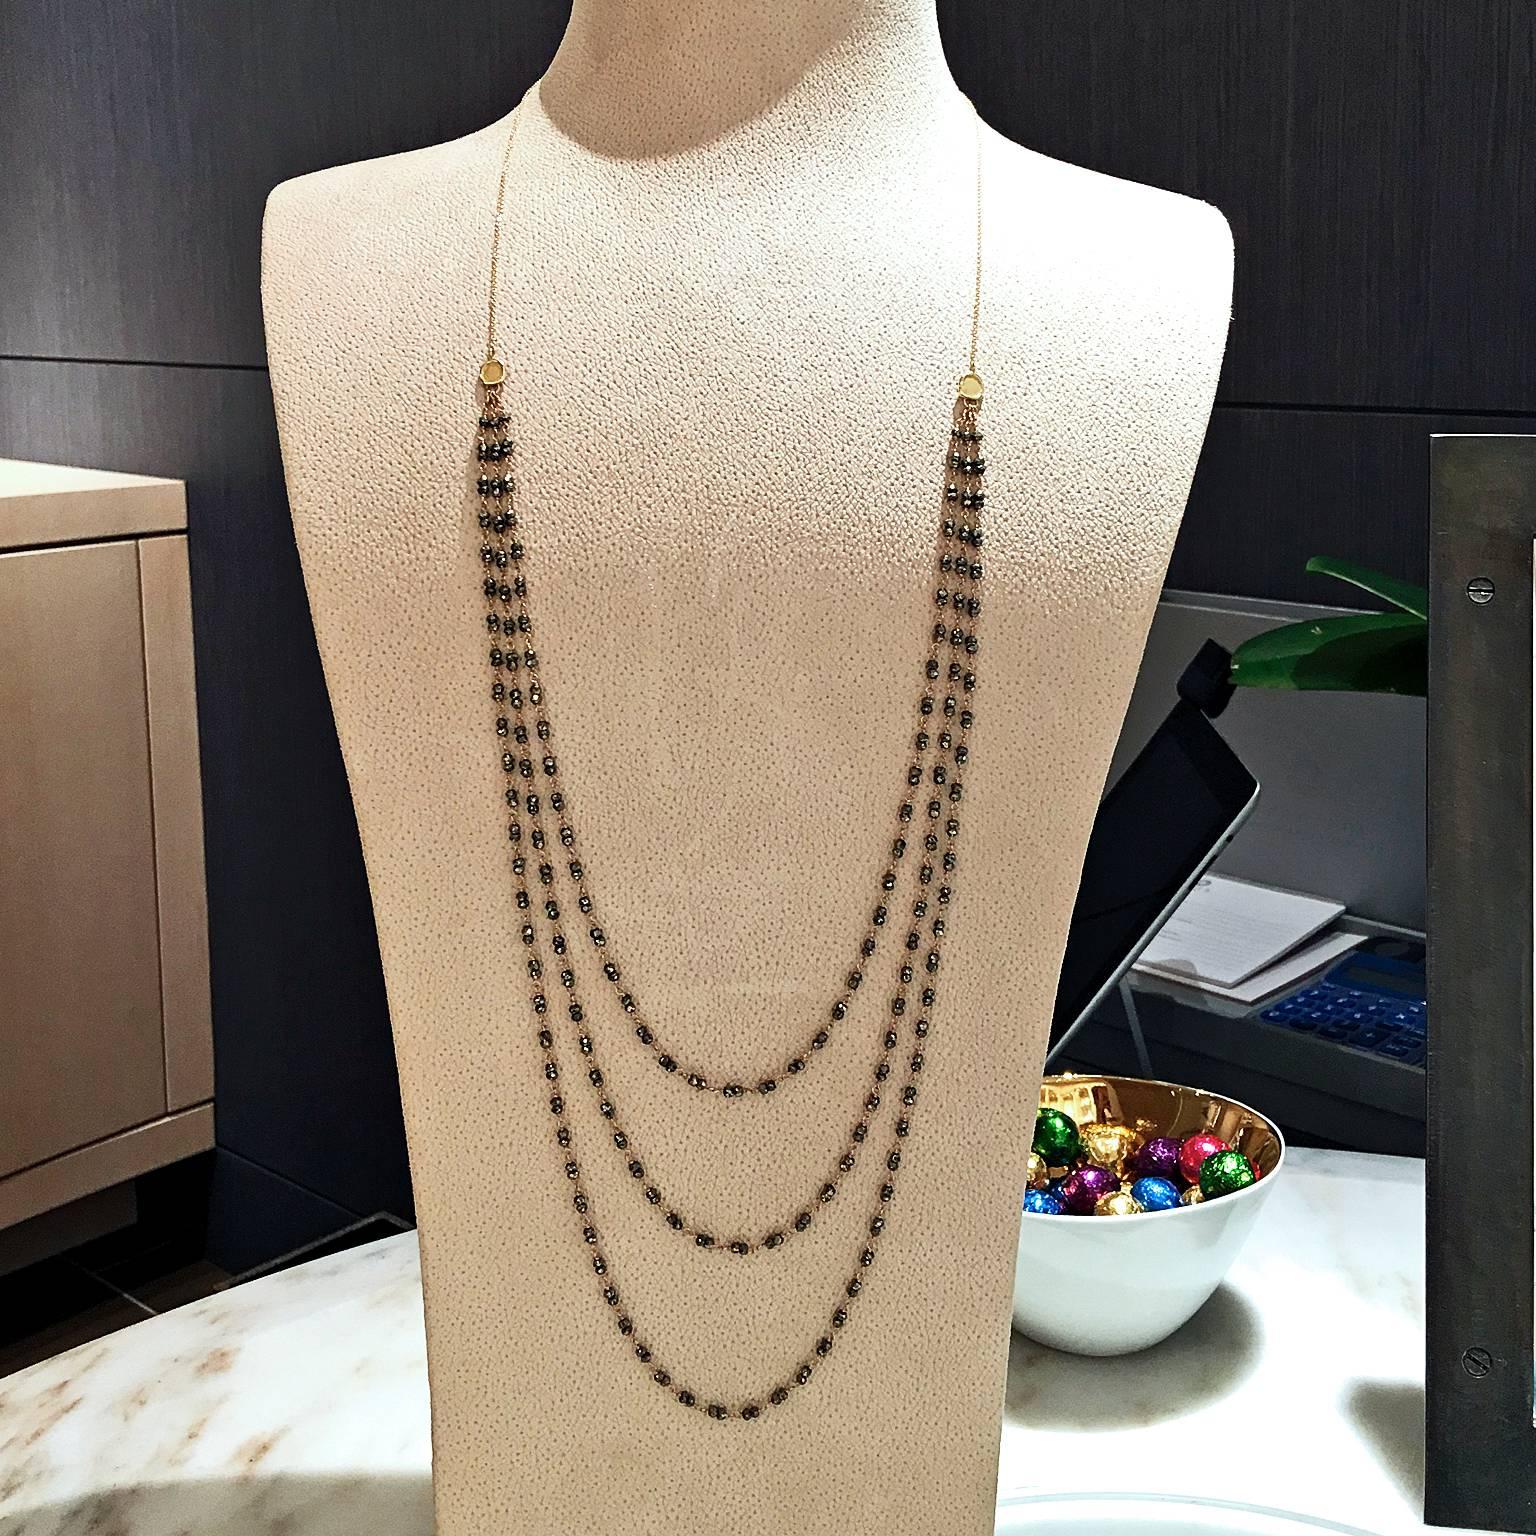 Shimmering Triple Strand Necklace handcrafted in matte finished 18k yellow gold with faceted pyrite beads, two 18k yellow gold coin accents and an 18k yellow gold lobster clasp.

Necklace is stamped 18k / 750 , and is hallmarked AS